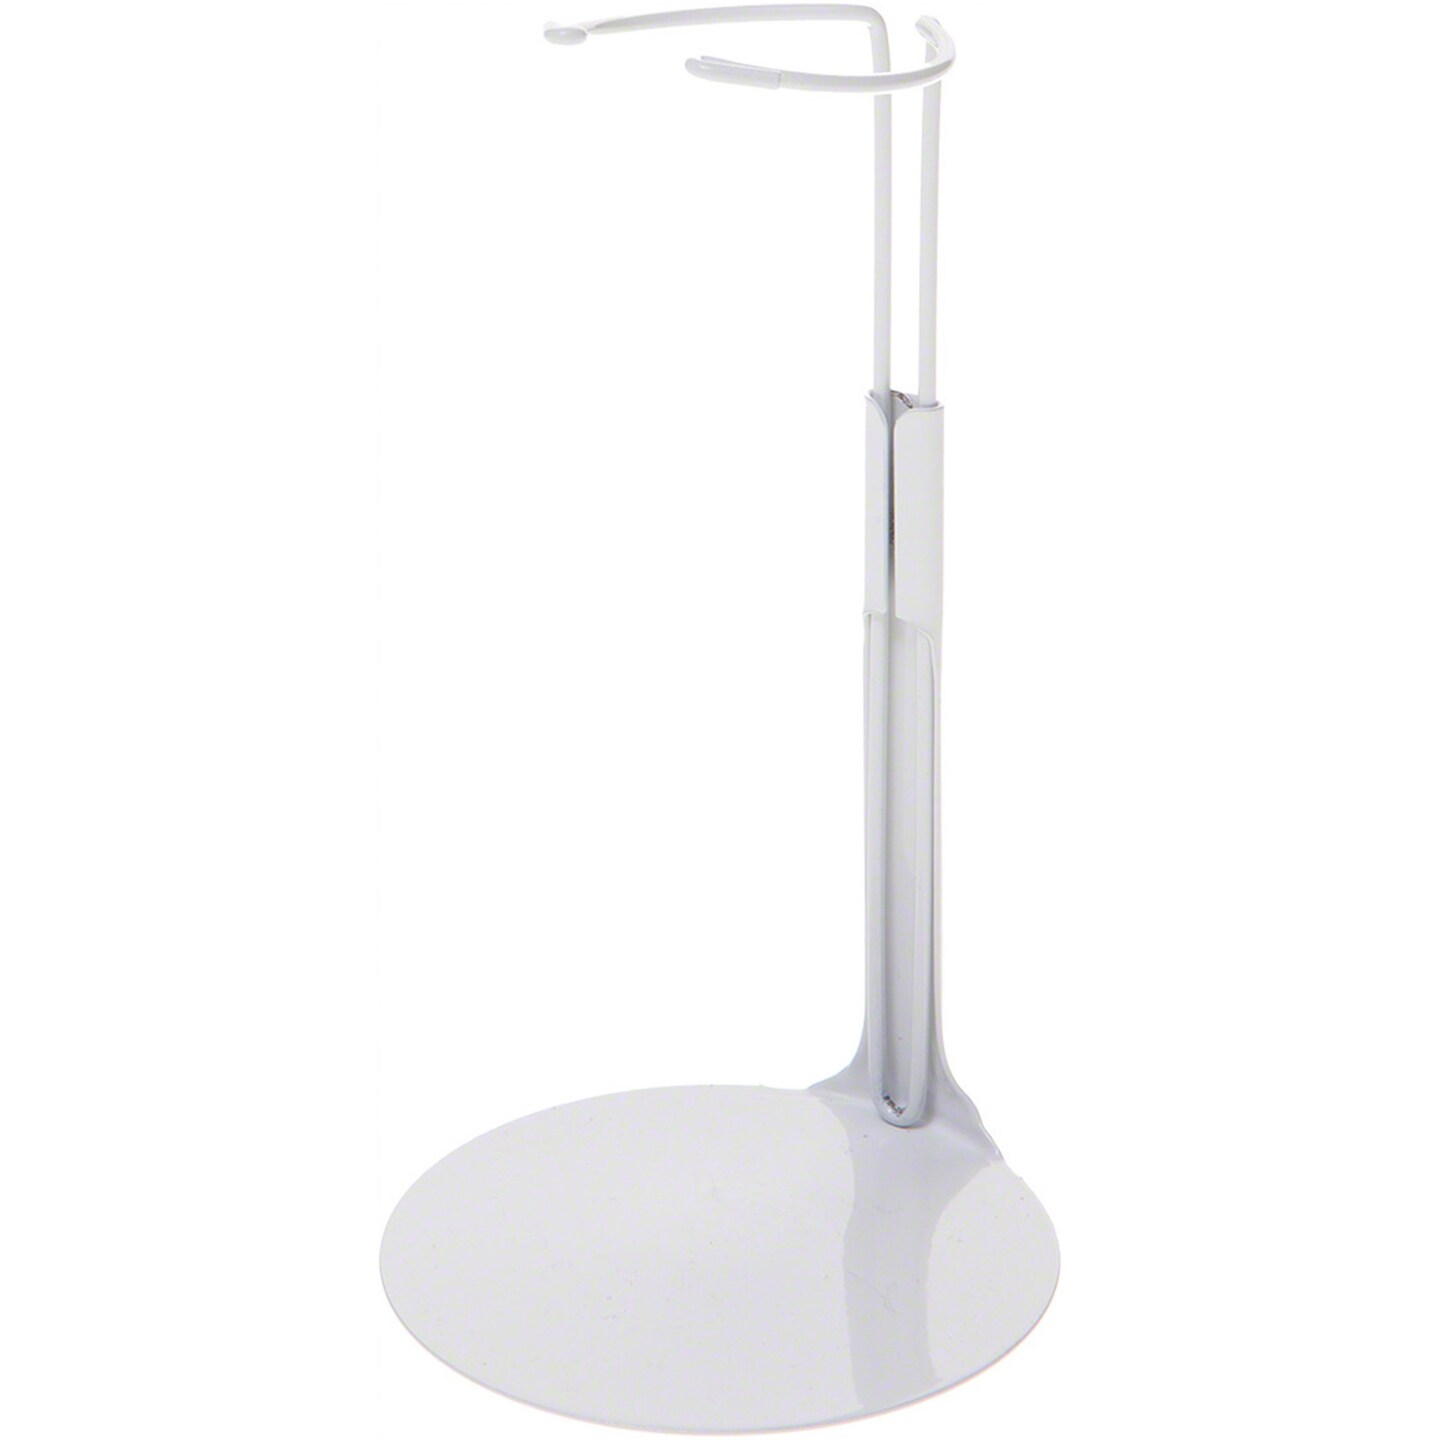 Kaiser 2101 White Adjustable Doll Stand, fits 8 to 11 inch Dolls or Action Figures, waist width adjusts from 1.375 to 1.75 inches